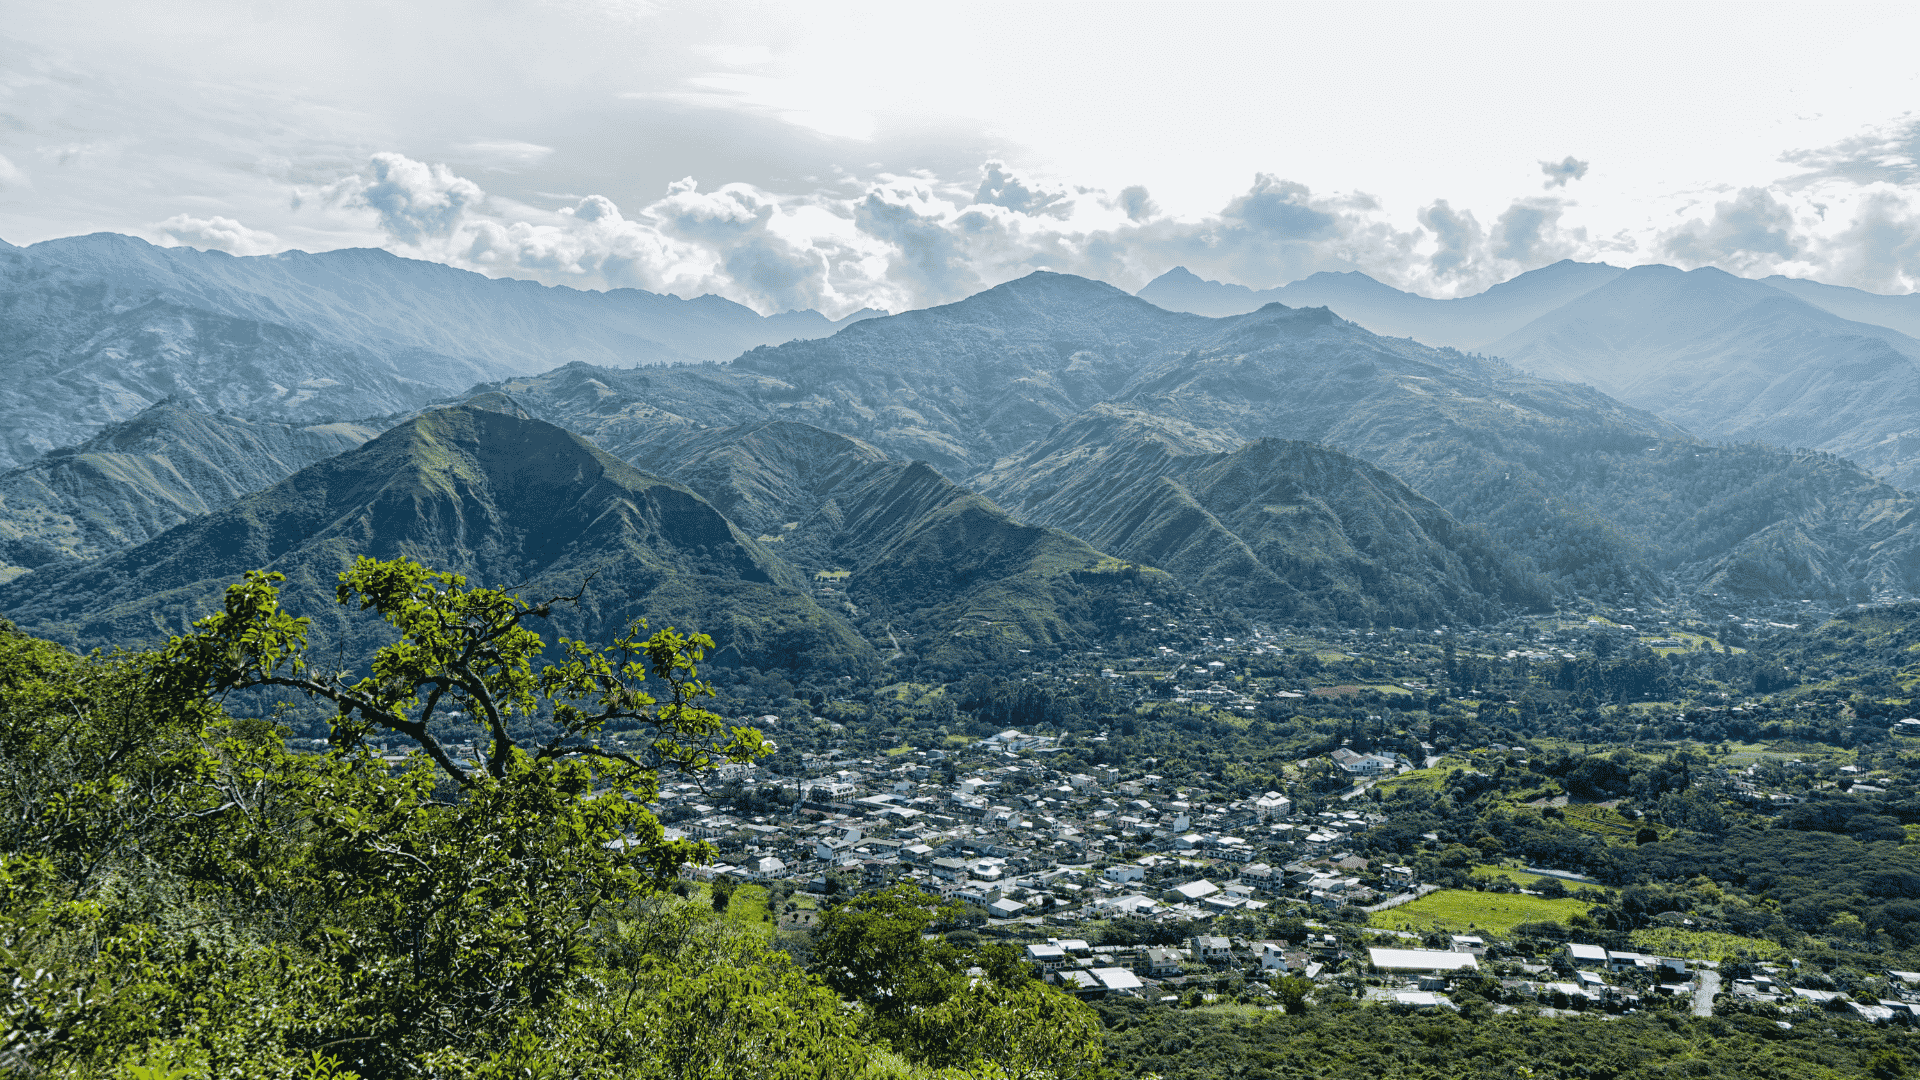 A photo of a city in Ecuador. In the foreground of the photo, buildings can be seen between lush green treees. In the background, mountians blur into a white, cloud-filled sky.